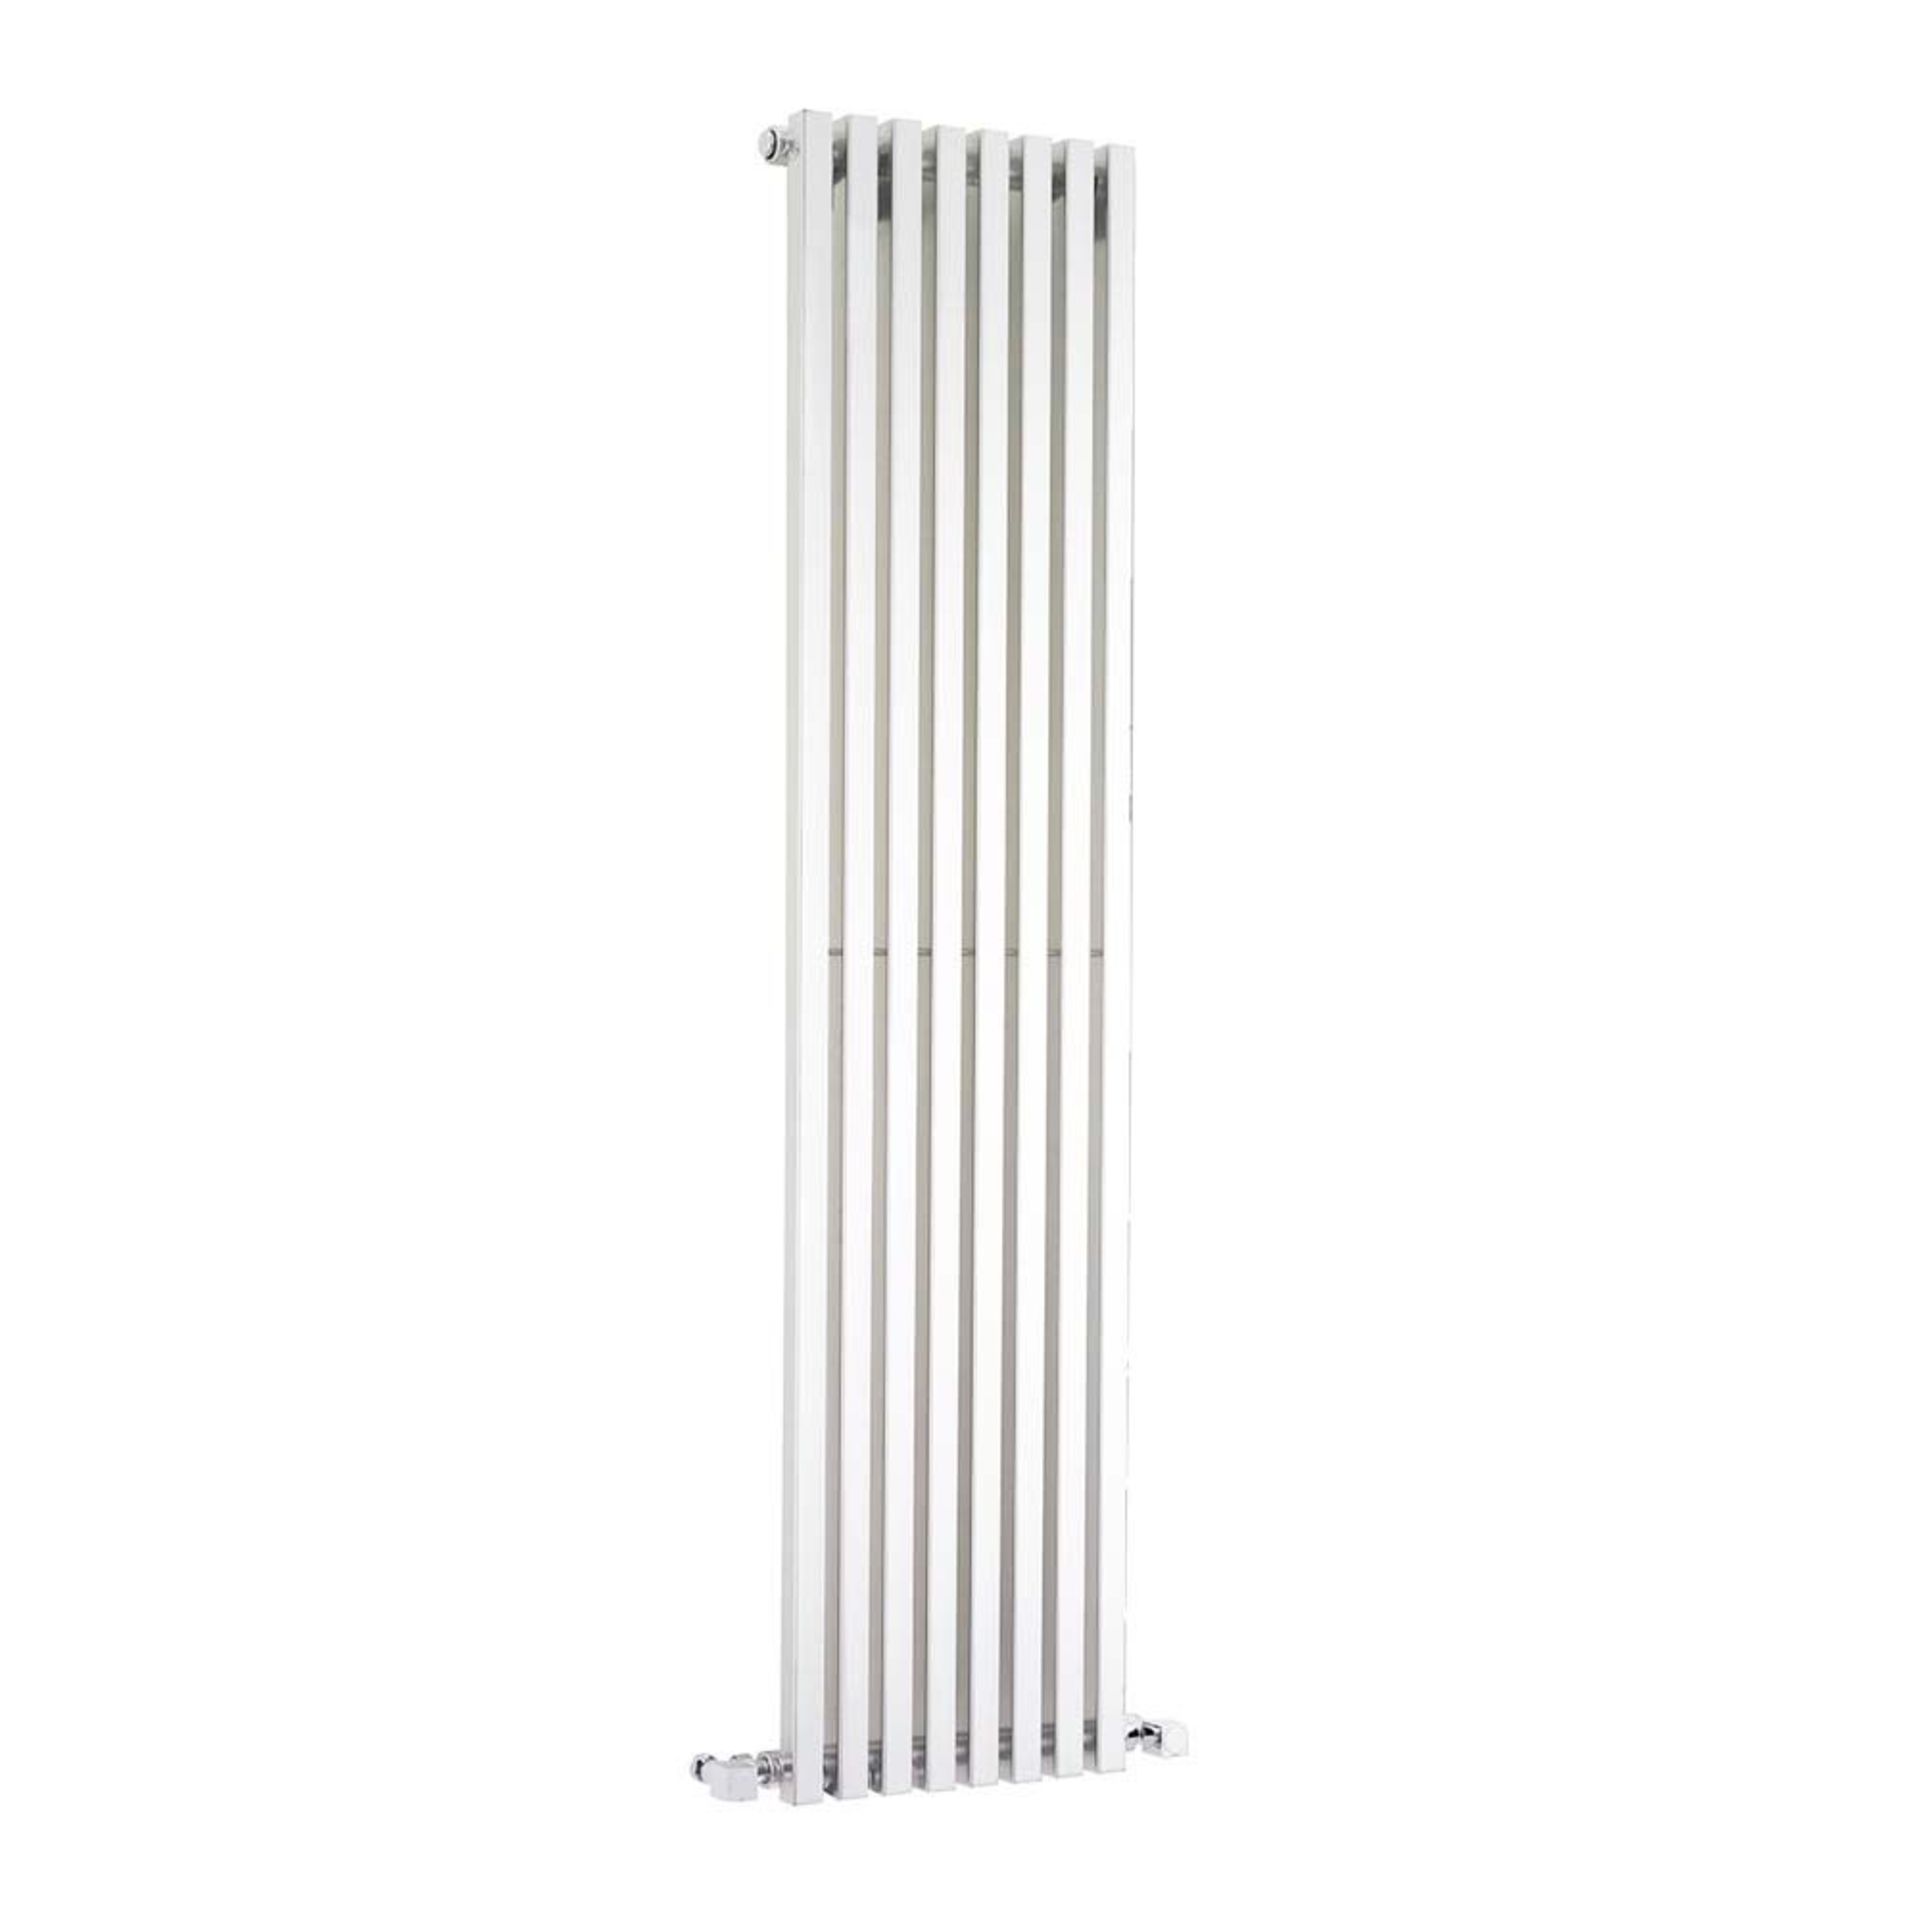 1 x Warmbase Kintonic 405x1800mm Contemporary White Vertical Radiator - New Boxed Stock - RRP £410 - Image 2 of 3